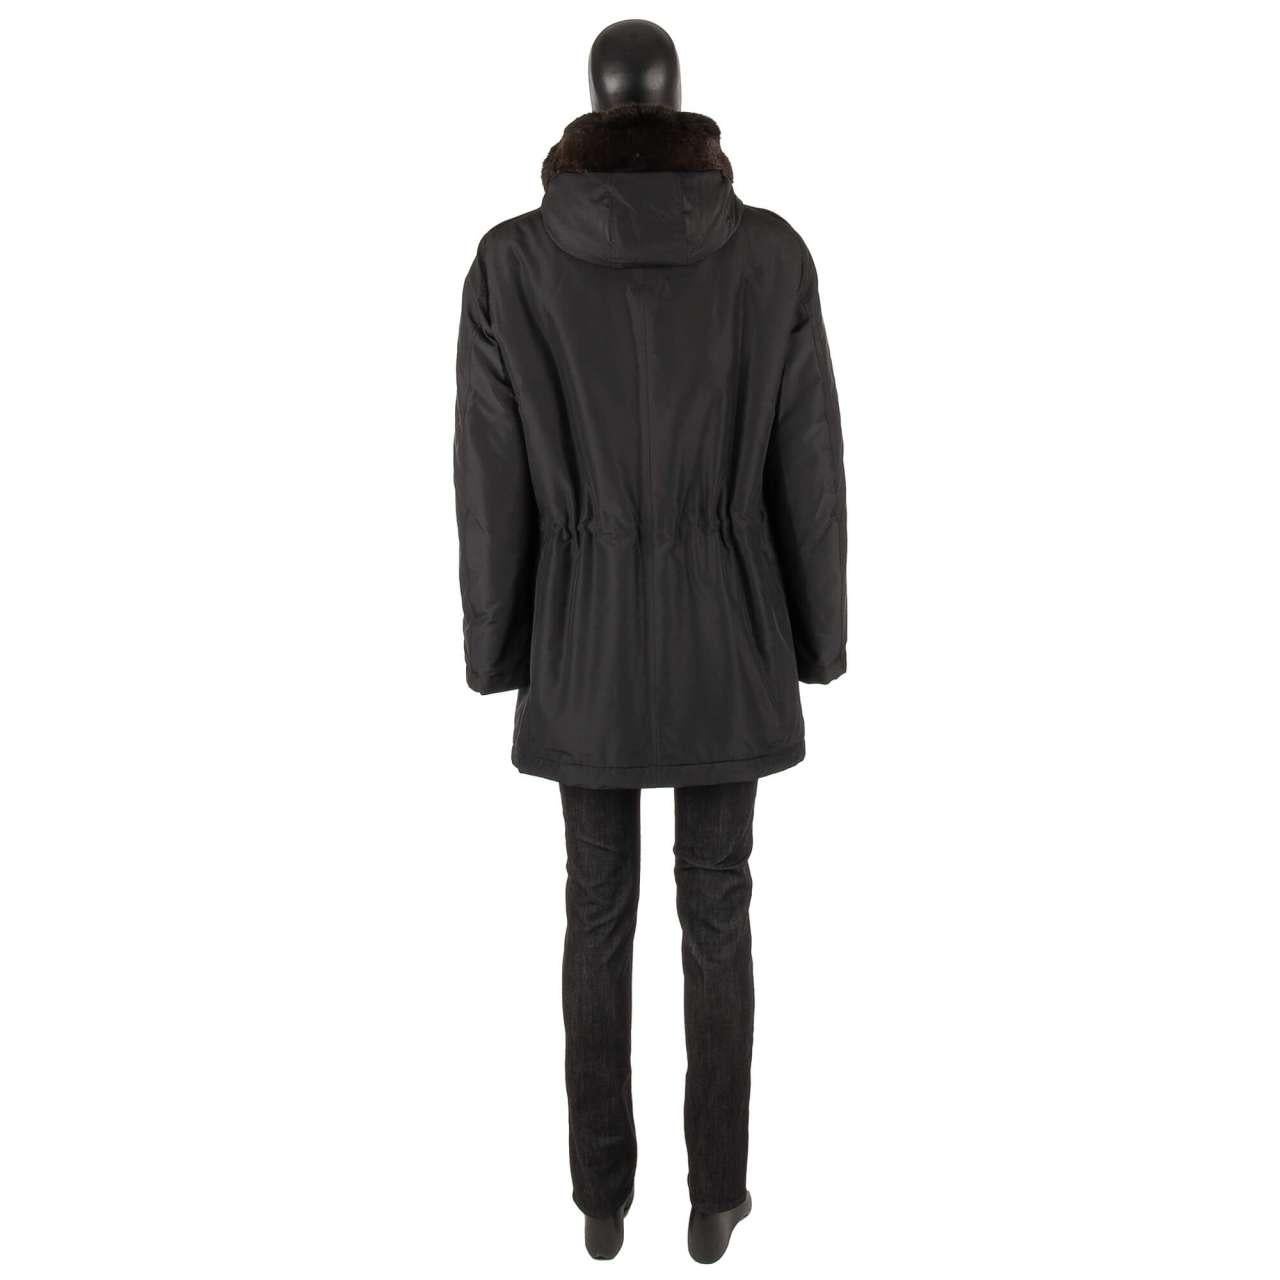 Dolce & Gabbana Silk Parka Jacket with Detachable Fur Lining and Hoody Black 56 For Sale 4